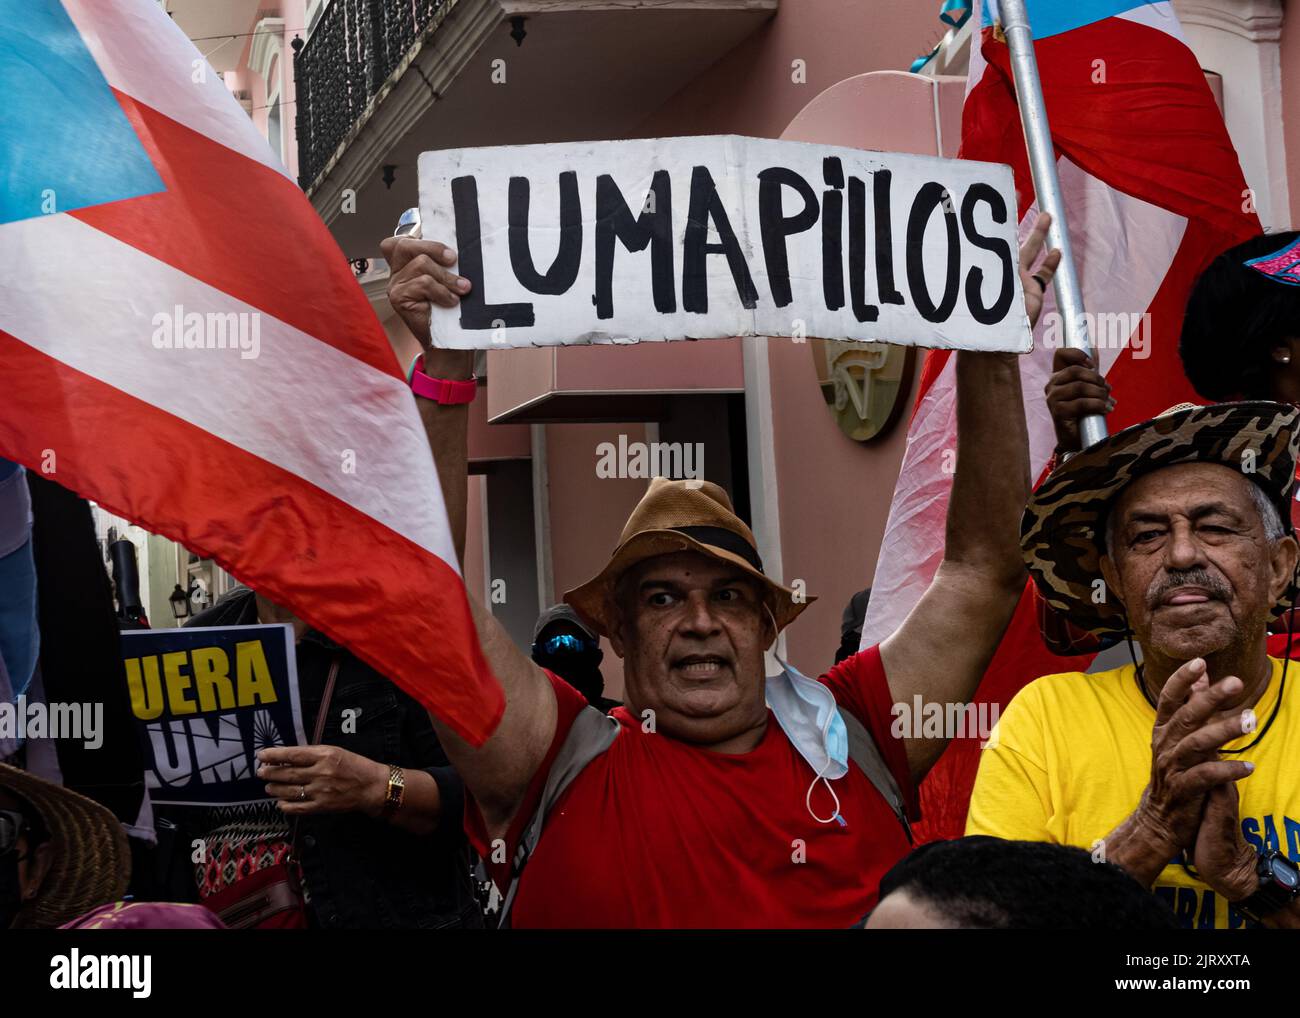 San Juan, Puerto Rico. 25th Aug, 2022. A protester holds a sign reading 'Luma pillos' (Luma Thieves) near La Fortaleza in San Juan, Puerto Rico on August 25, 2022. Energy company Luma took control of the Puerto Rican energy grid in 2020, with blackouts increasing and prices rising since. (Photo by Collin Mayfield/Sipa USA) Credit: Sipa USA/Alamy Live News Stock Photo